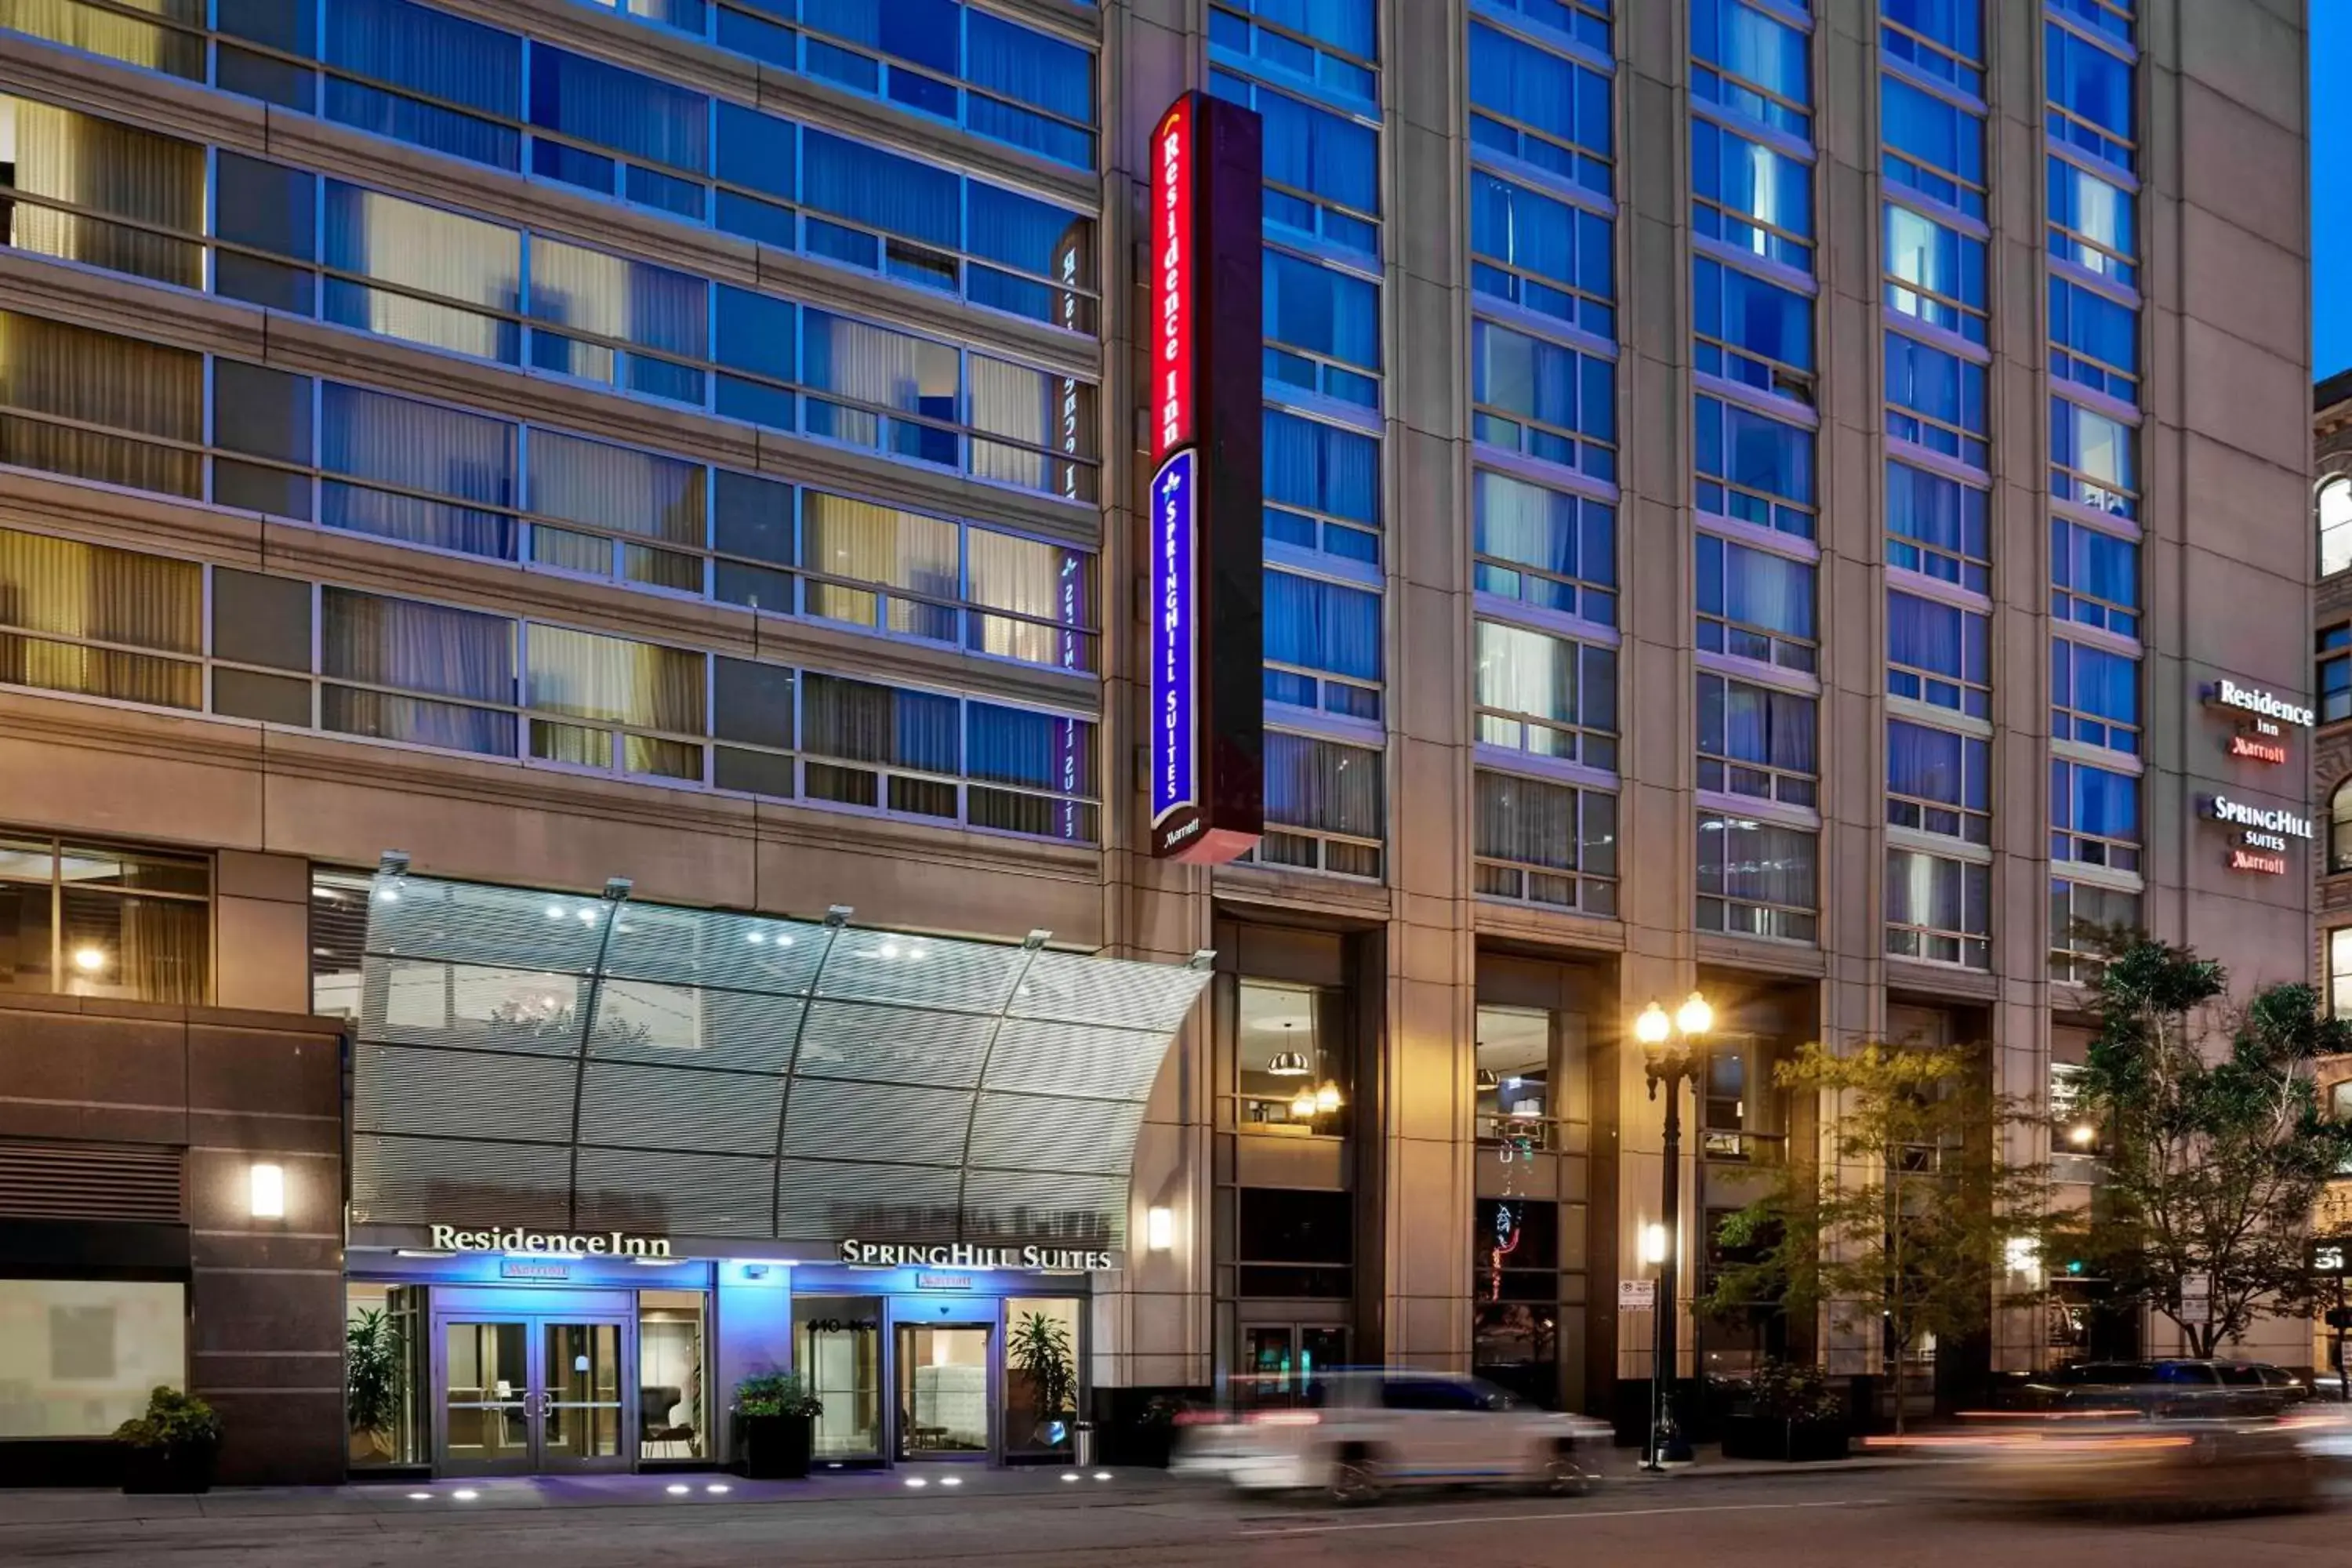 Property Building in SpringHill Suites Chicago Downtown/River North